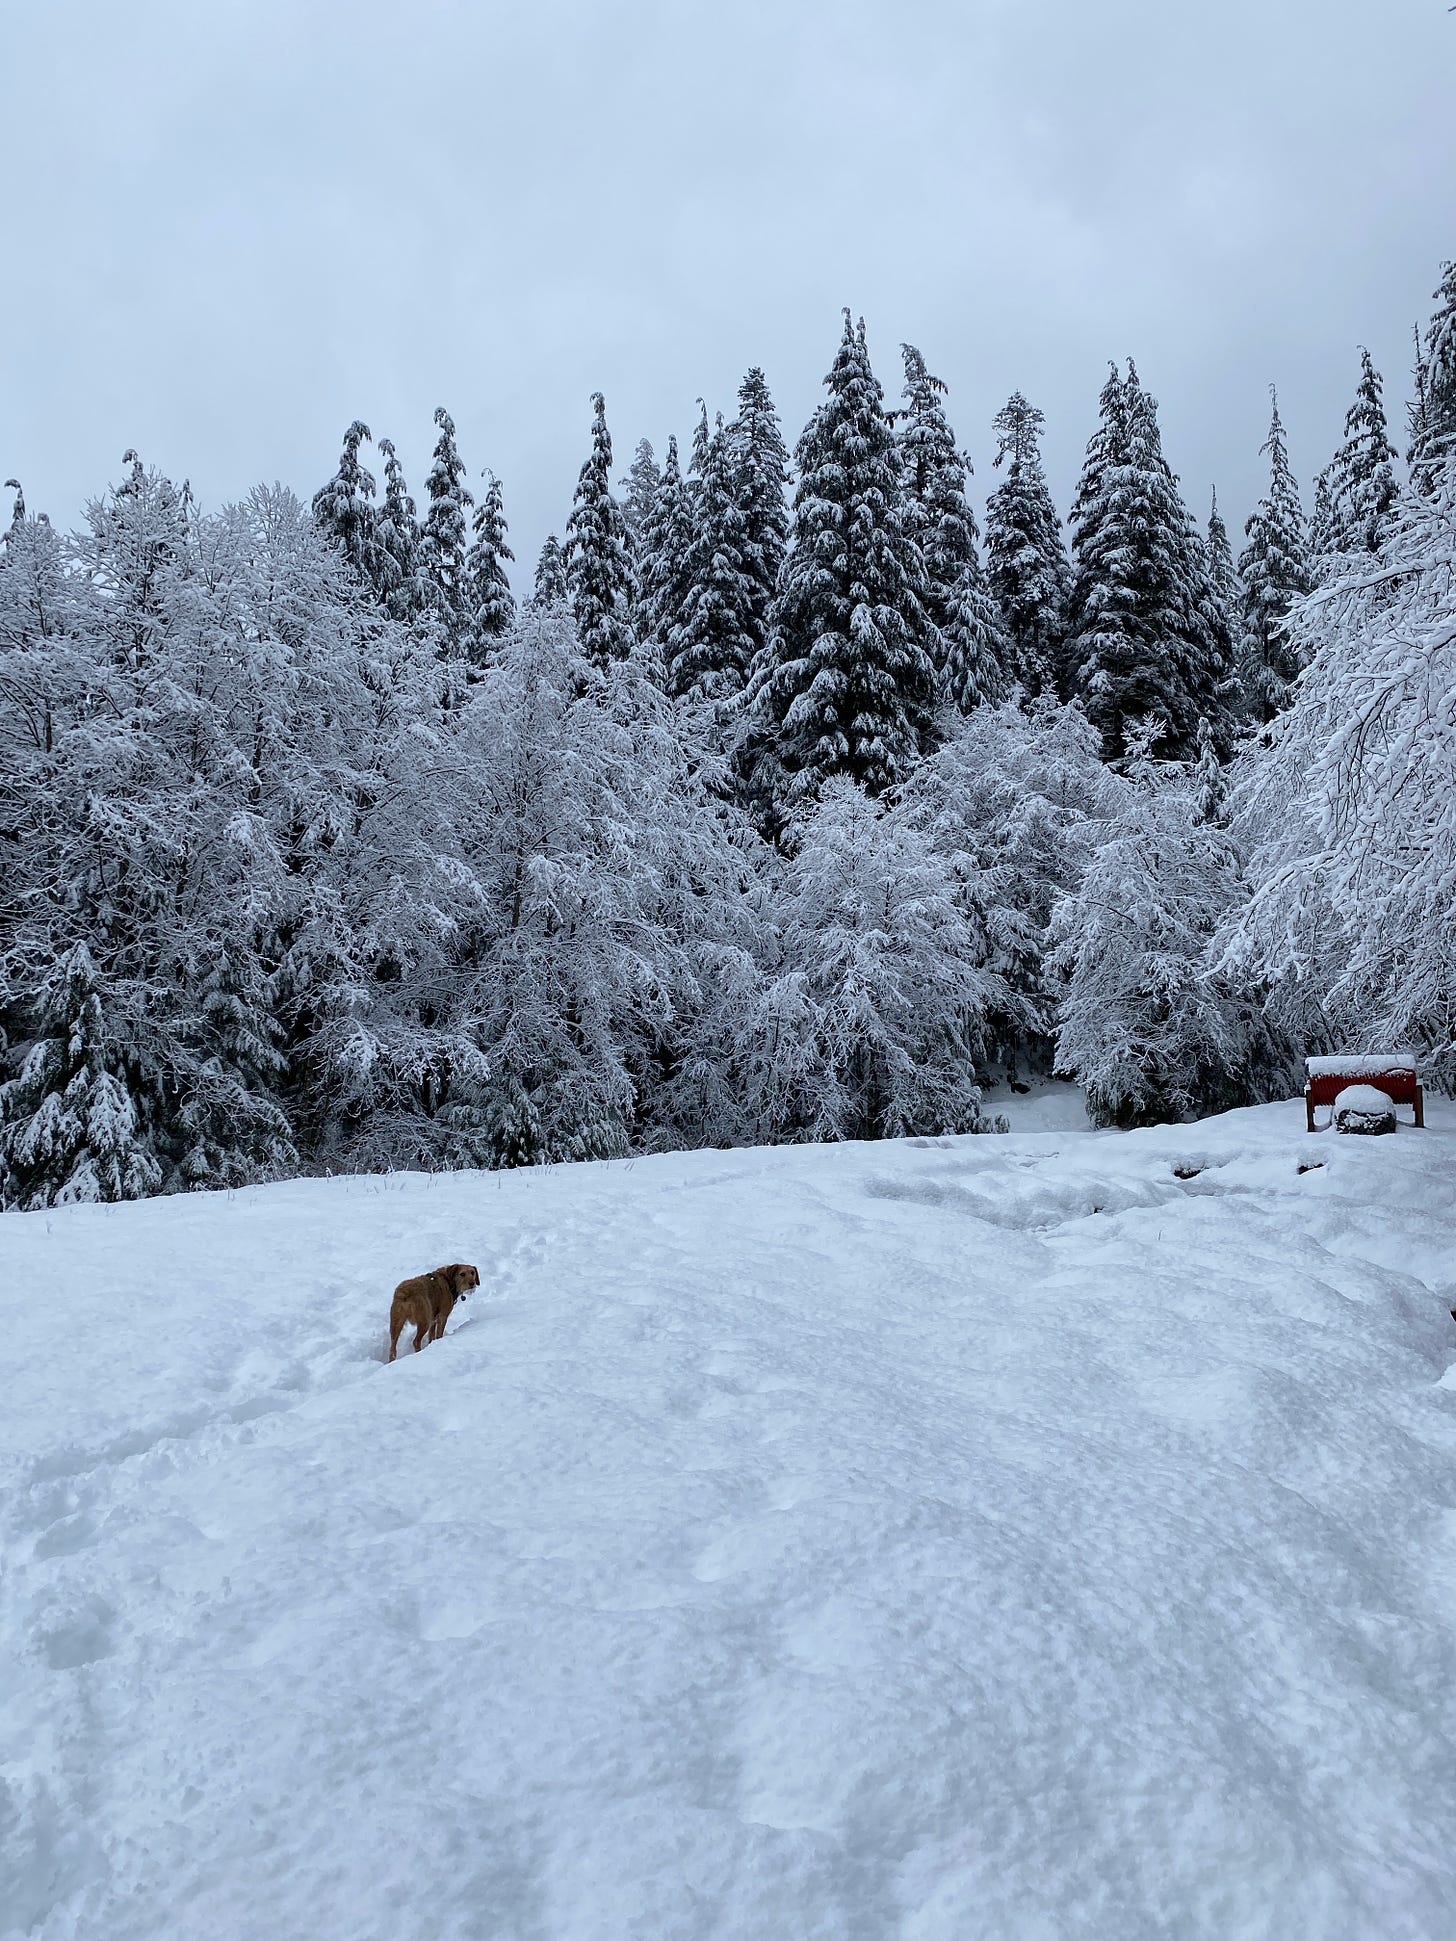 A clearing covered in deep snow with a forest of conifers in the background. The trees are frosted white. A dog walks towards the forest and looks back at the camera.